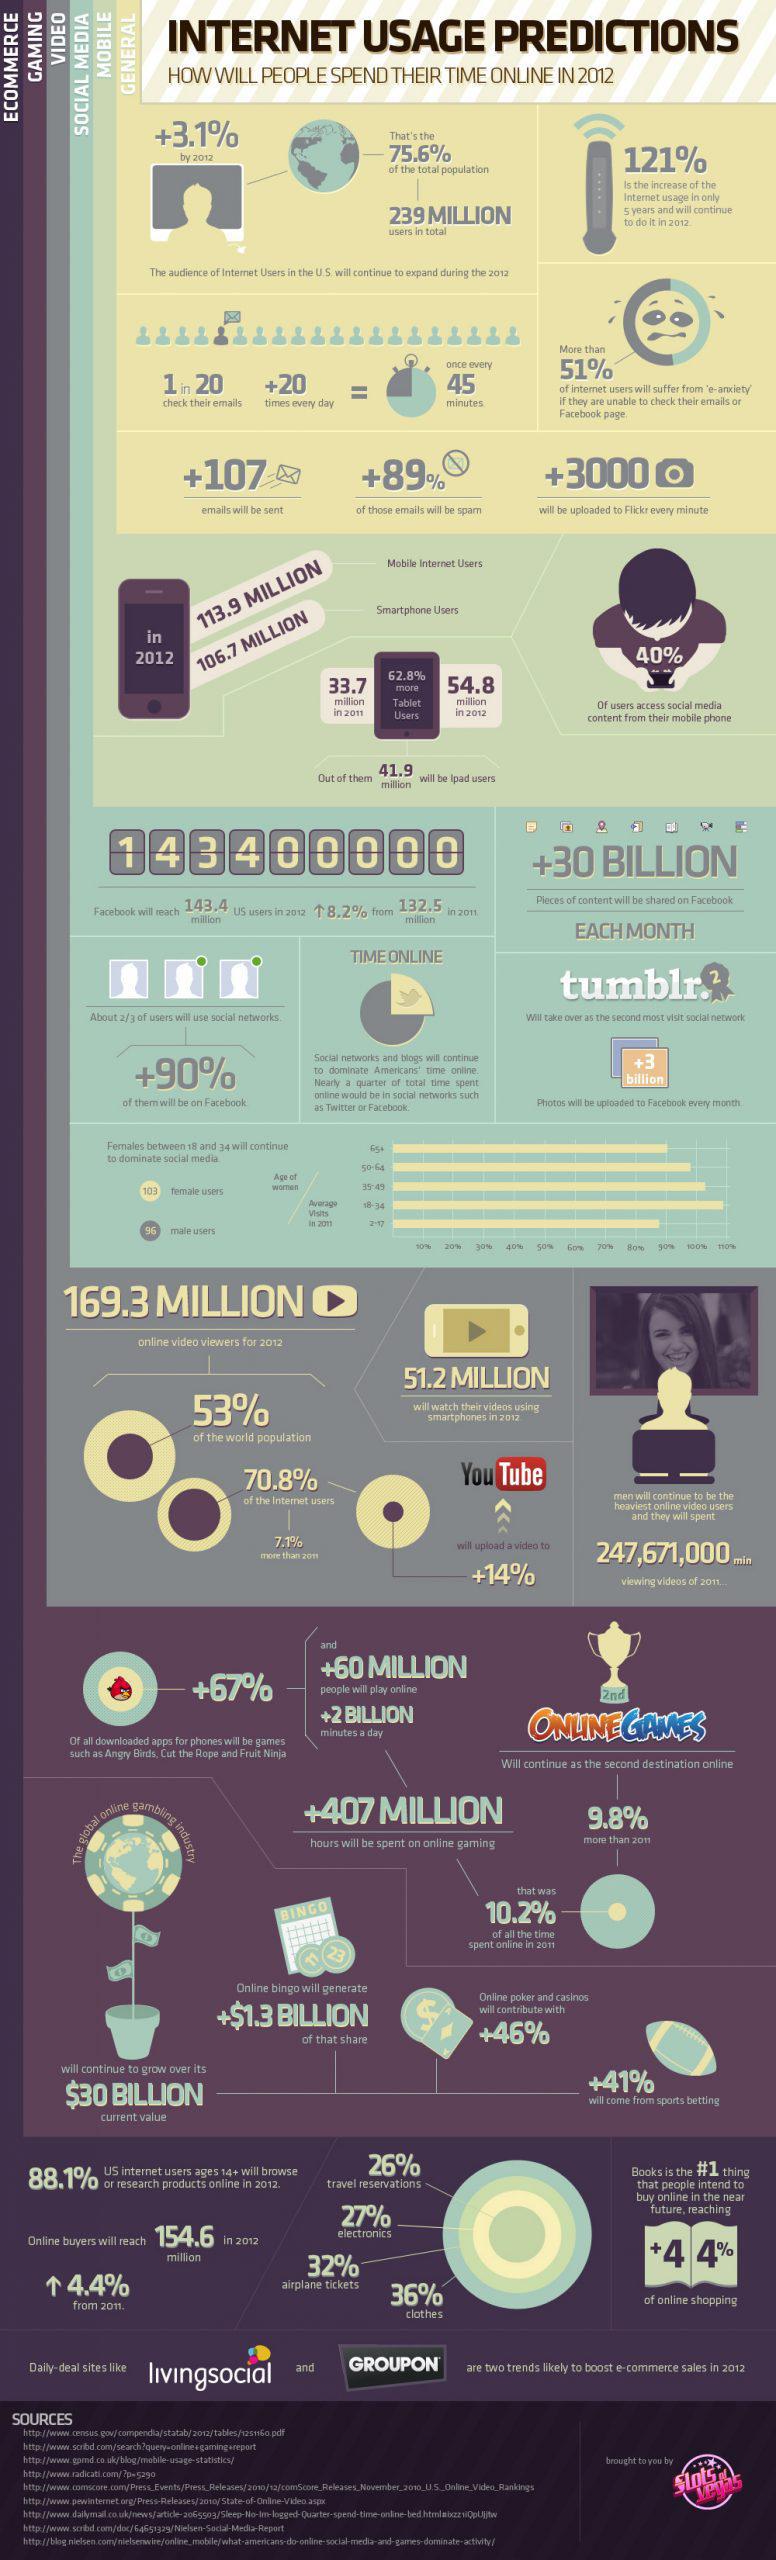 Infographic: Internet Usage Predictions for 2012